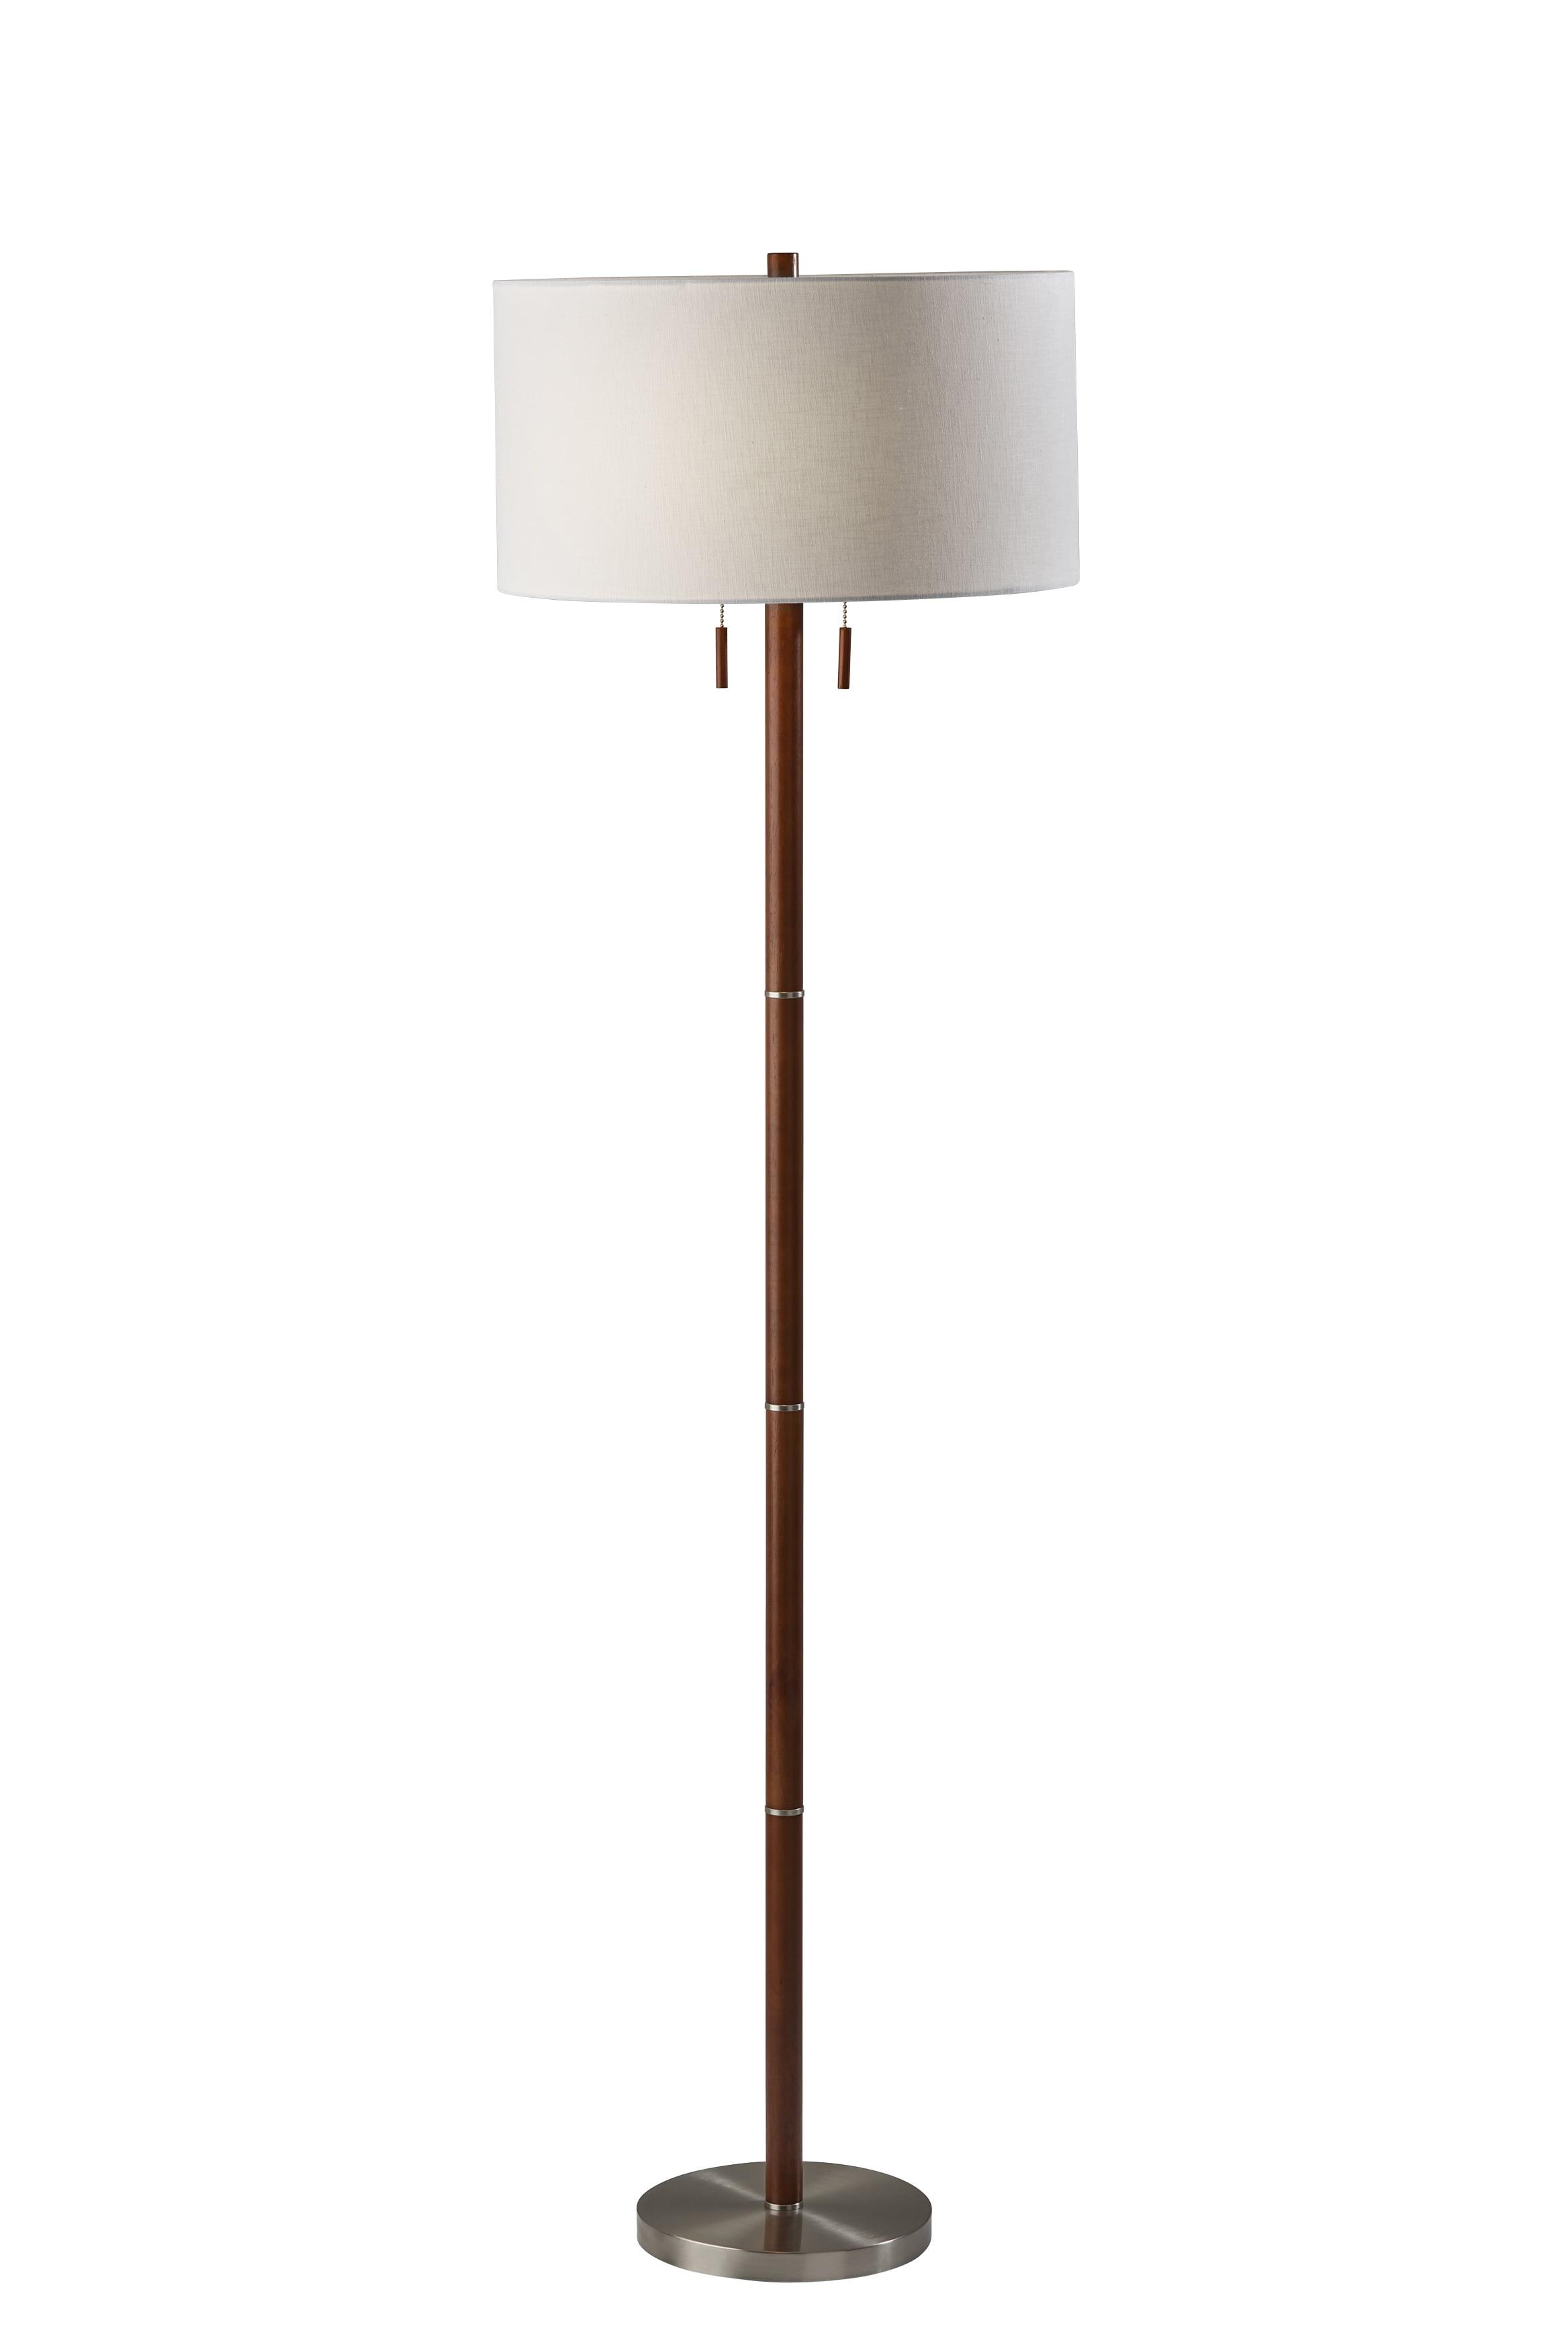 Madeline 66'' Walnut and Brushed Steel Floor Lamp with White Shade